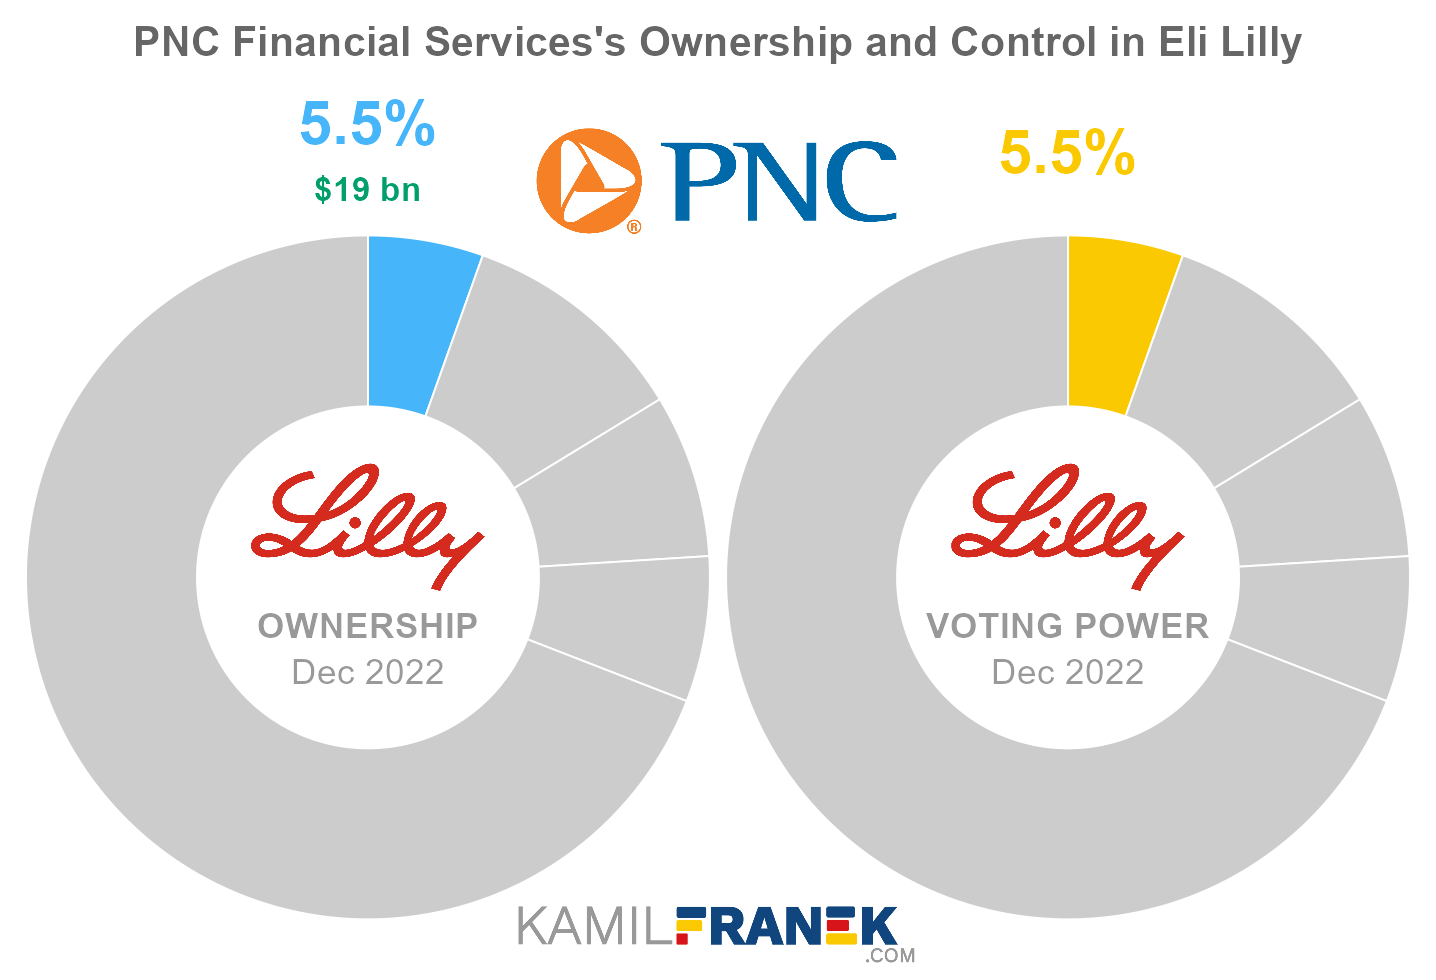 PNC Financial Services's share ownership and voting power in Eli Lilly (chart)